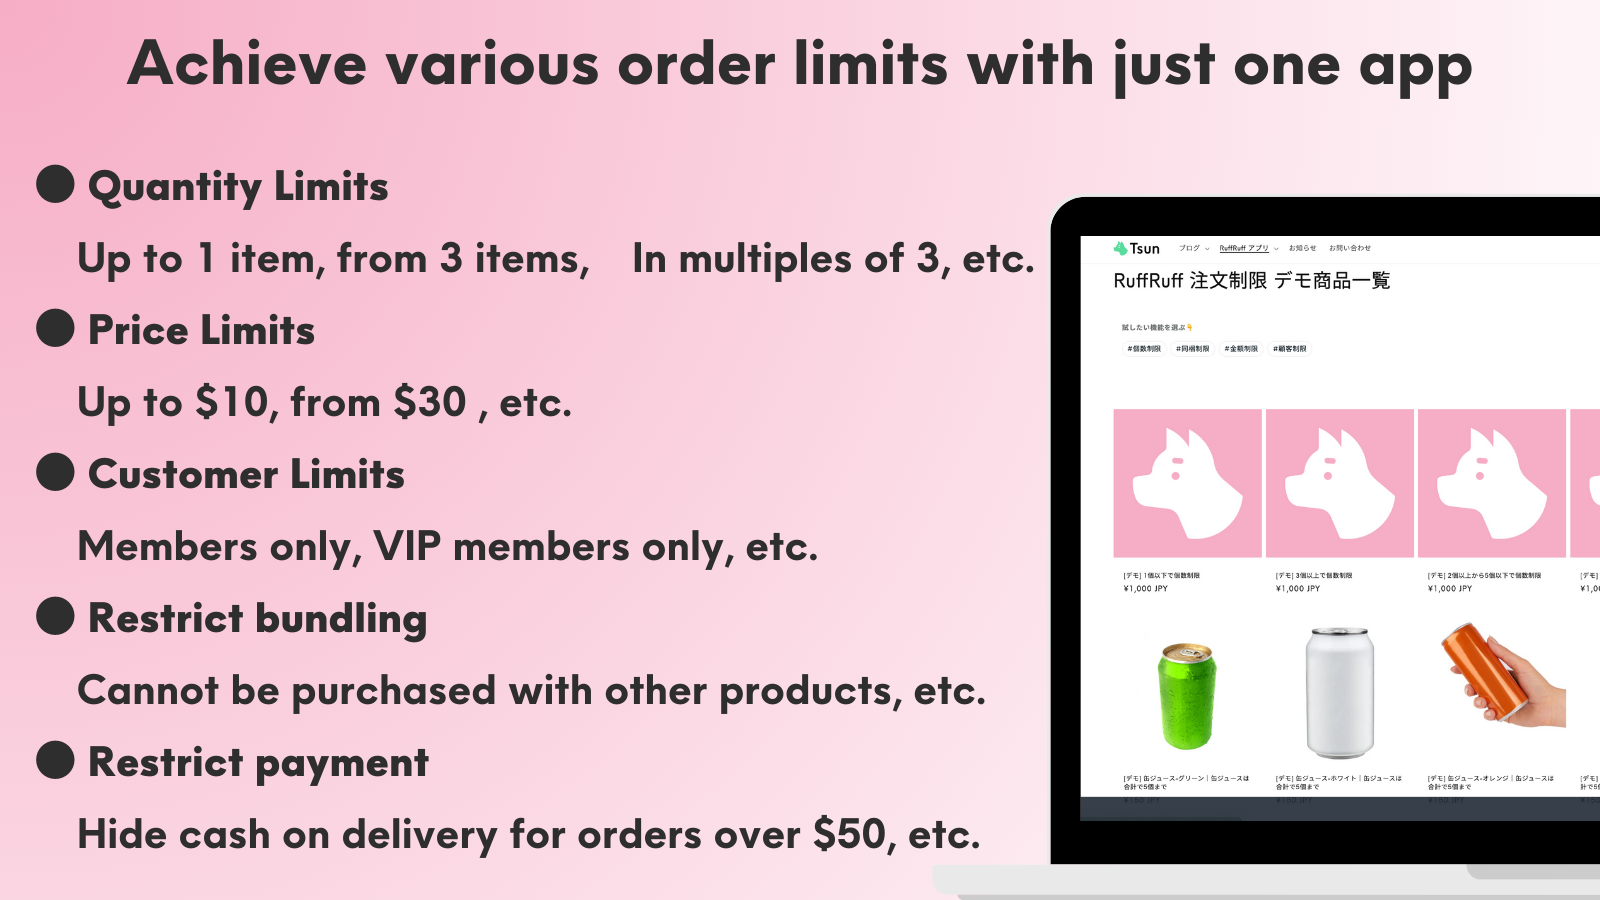 Achieve various order limits with just one app